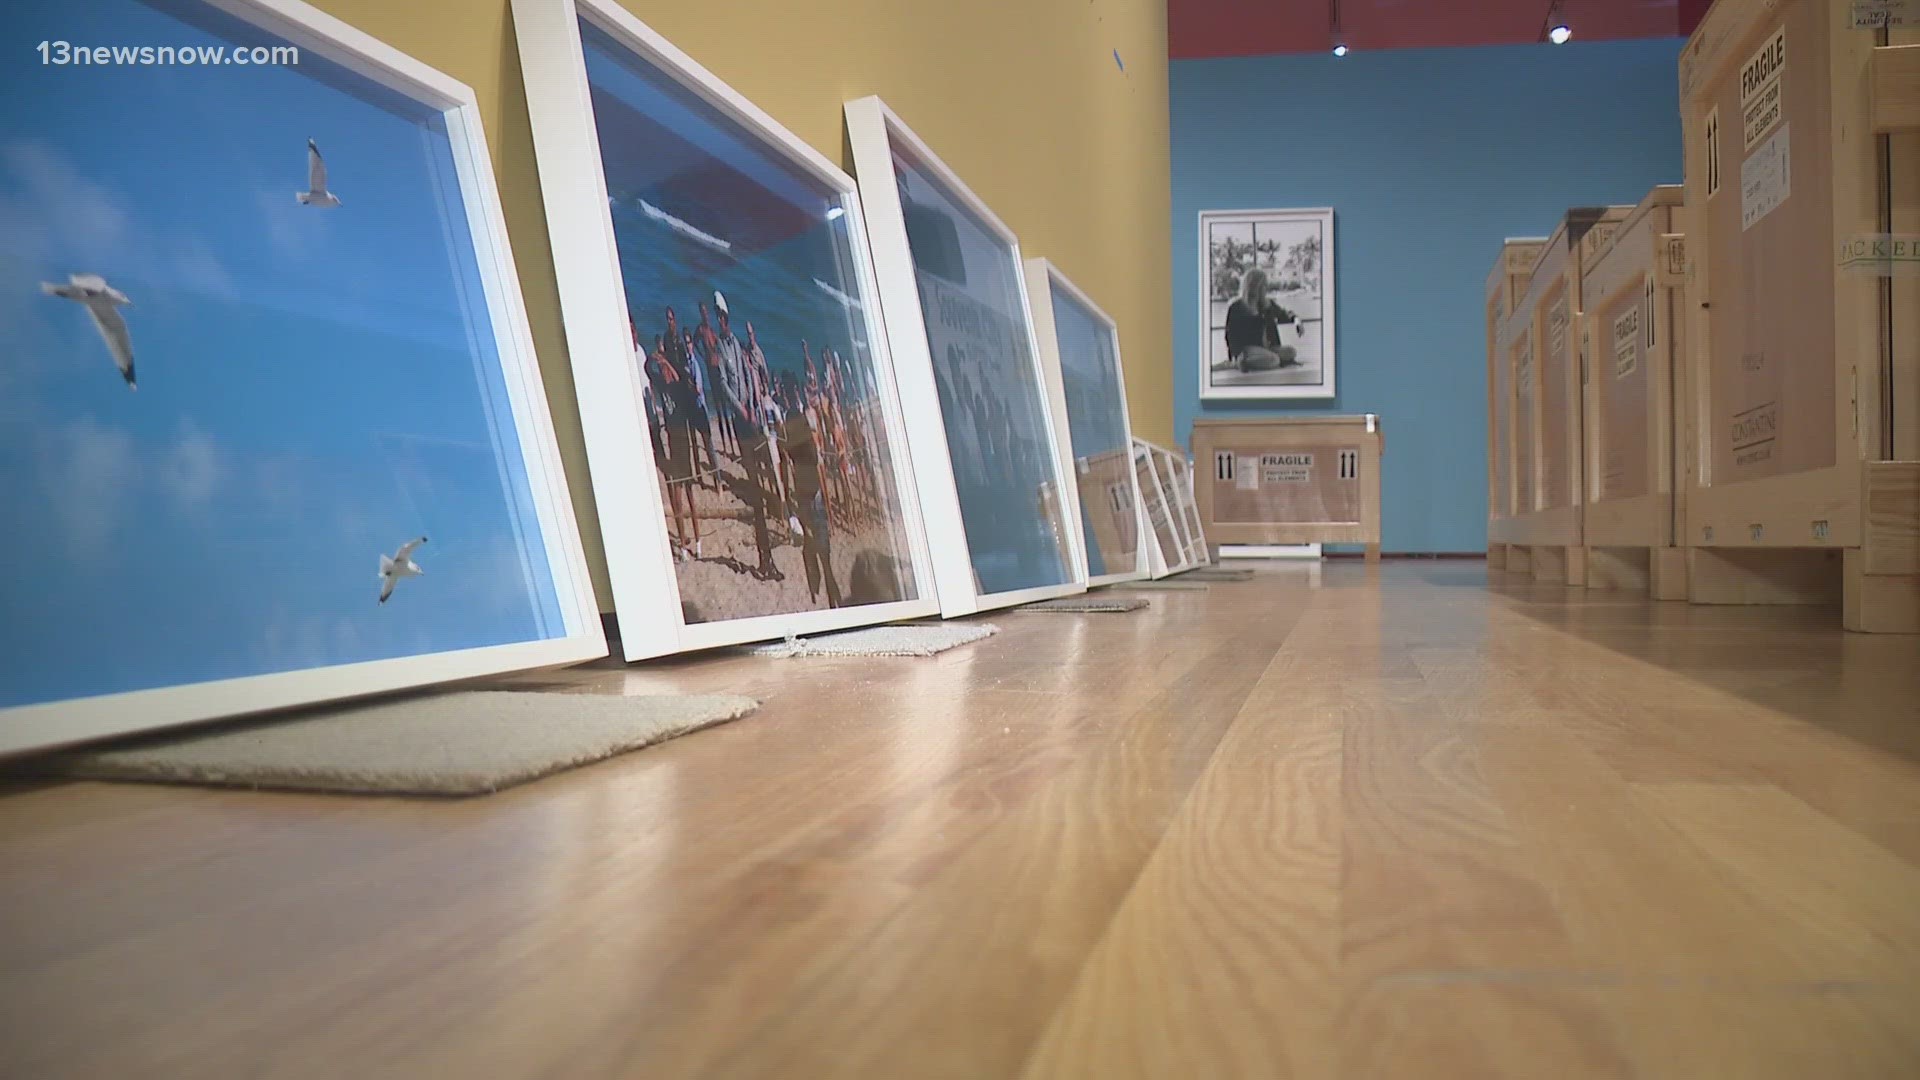 Paul McCartney's photography exhibit drew visitors from across the country to Norfolk's Chrysler Museum of Art. Now, employees have packed up those iconic photos.